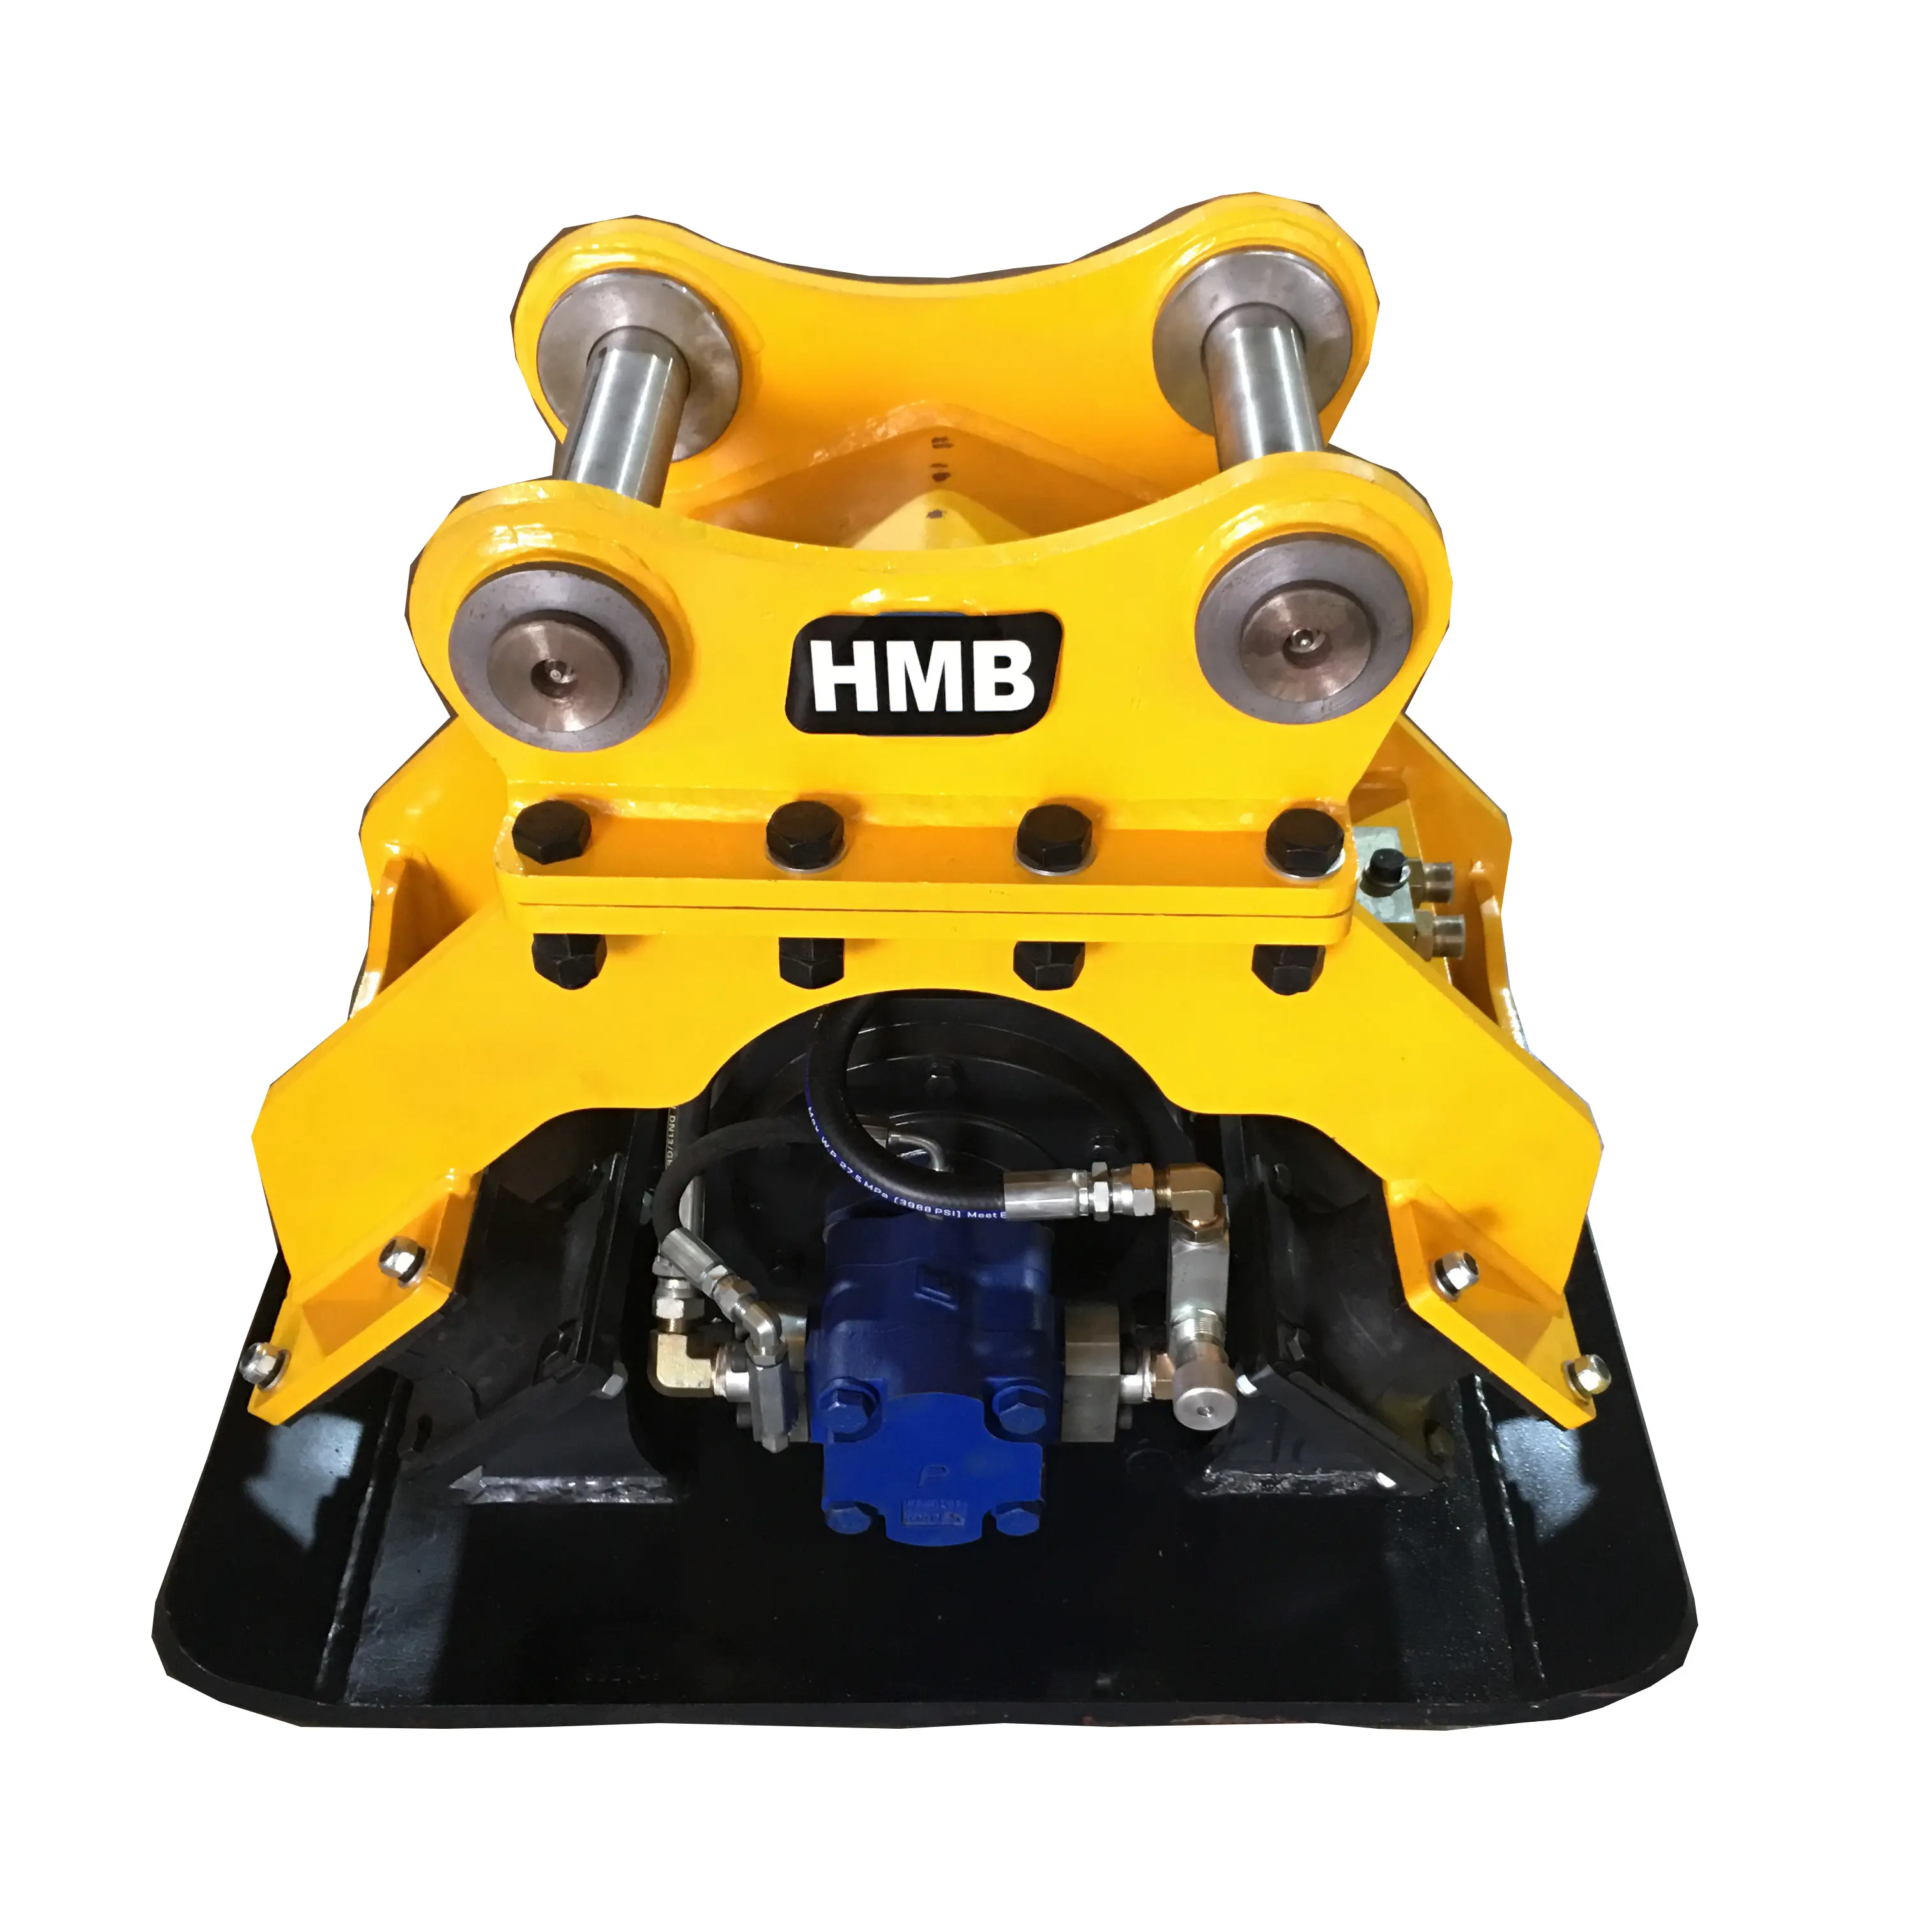 Excavator Hydraulic Vibrating Plate Compactor Machine Earth Compactor for Sale ISO9001&CE 100-150 Bar 1160*700 Mm 12-16 Ton HMB